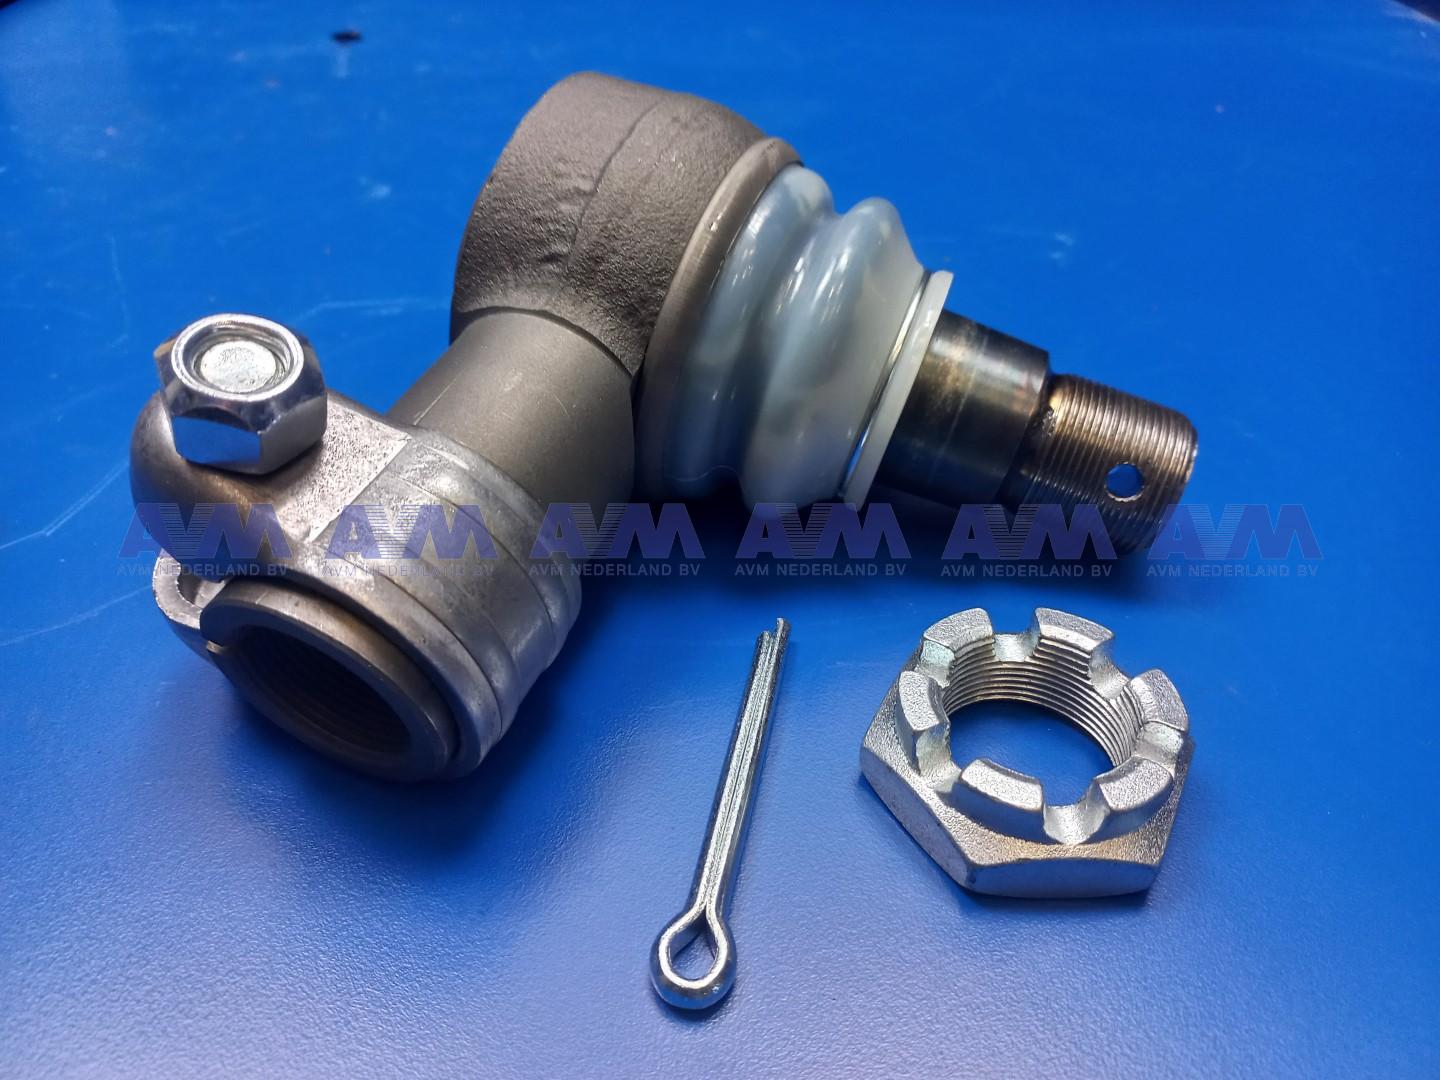 Ball joint - EQ 8-160-050-0-01936 Elbe